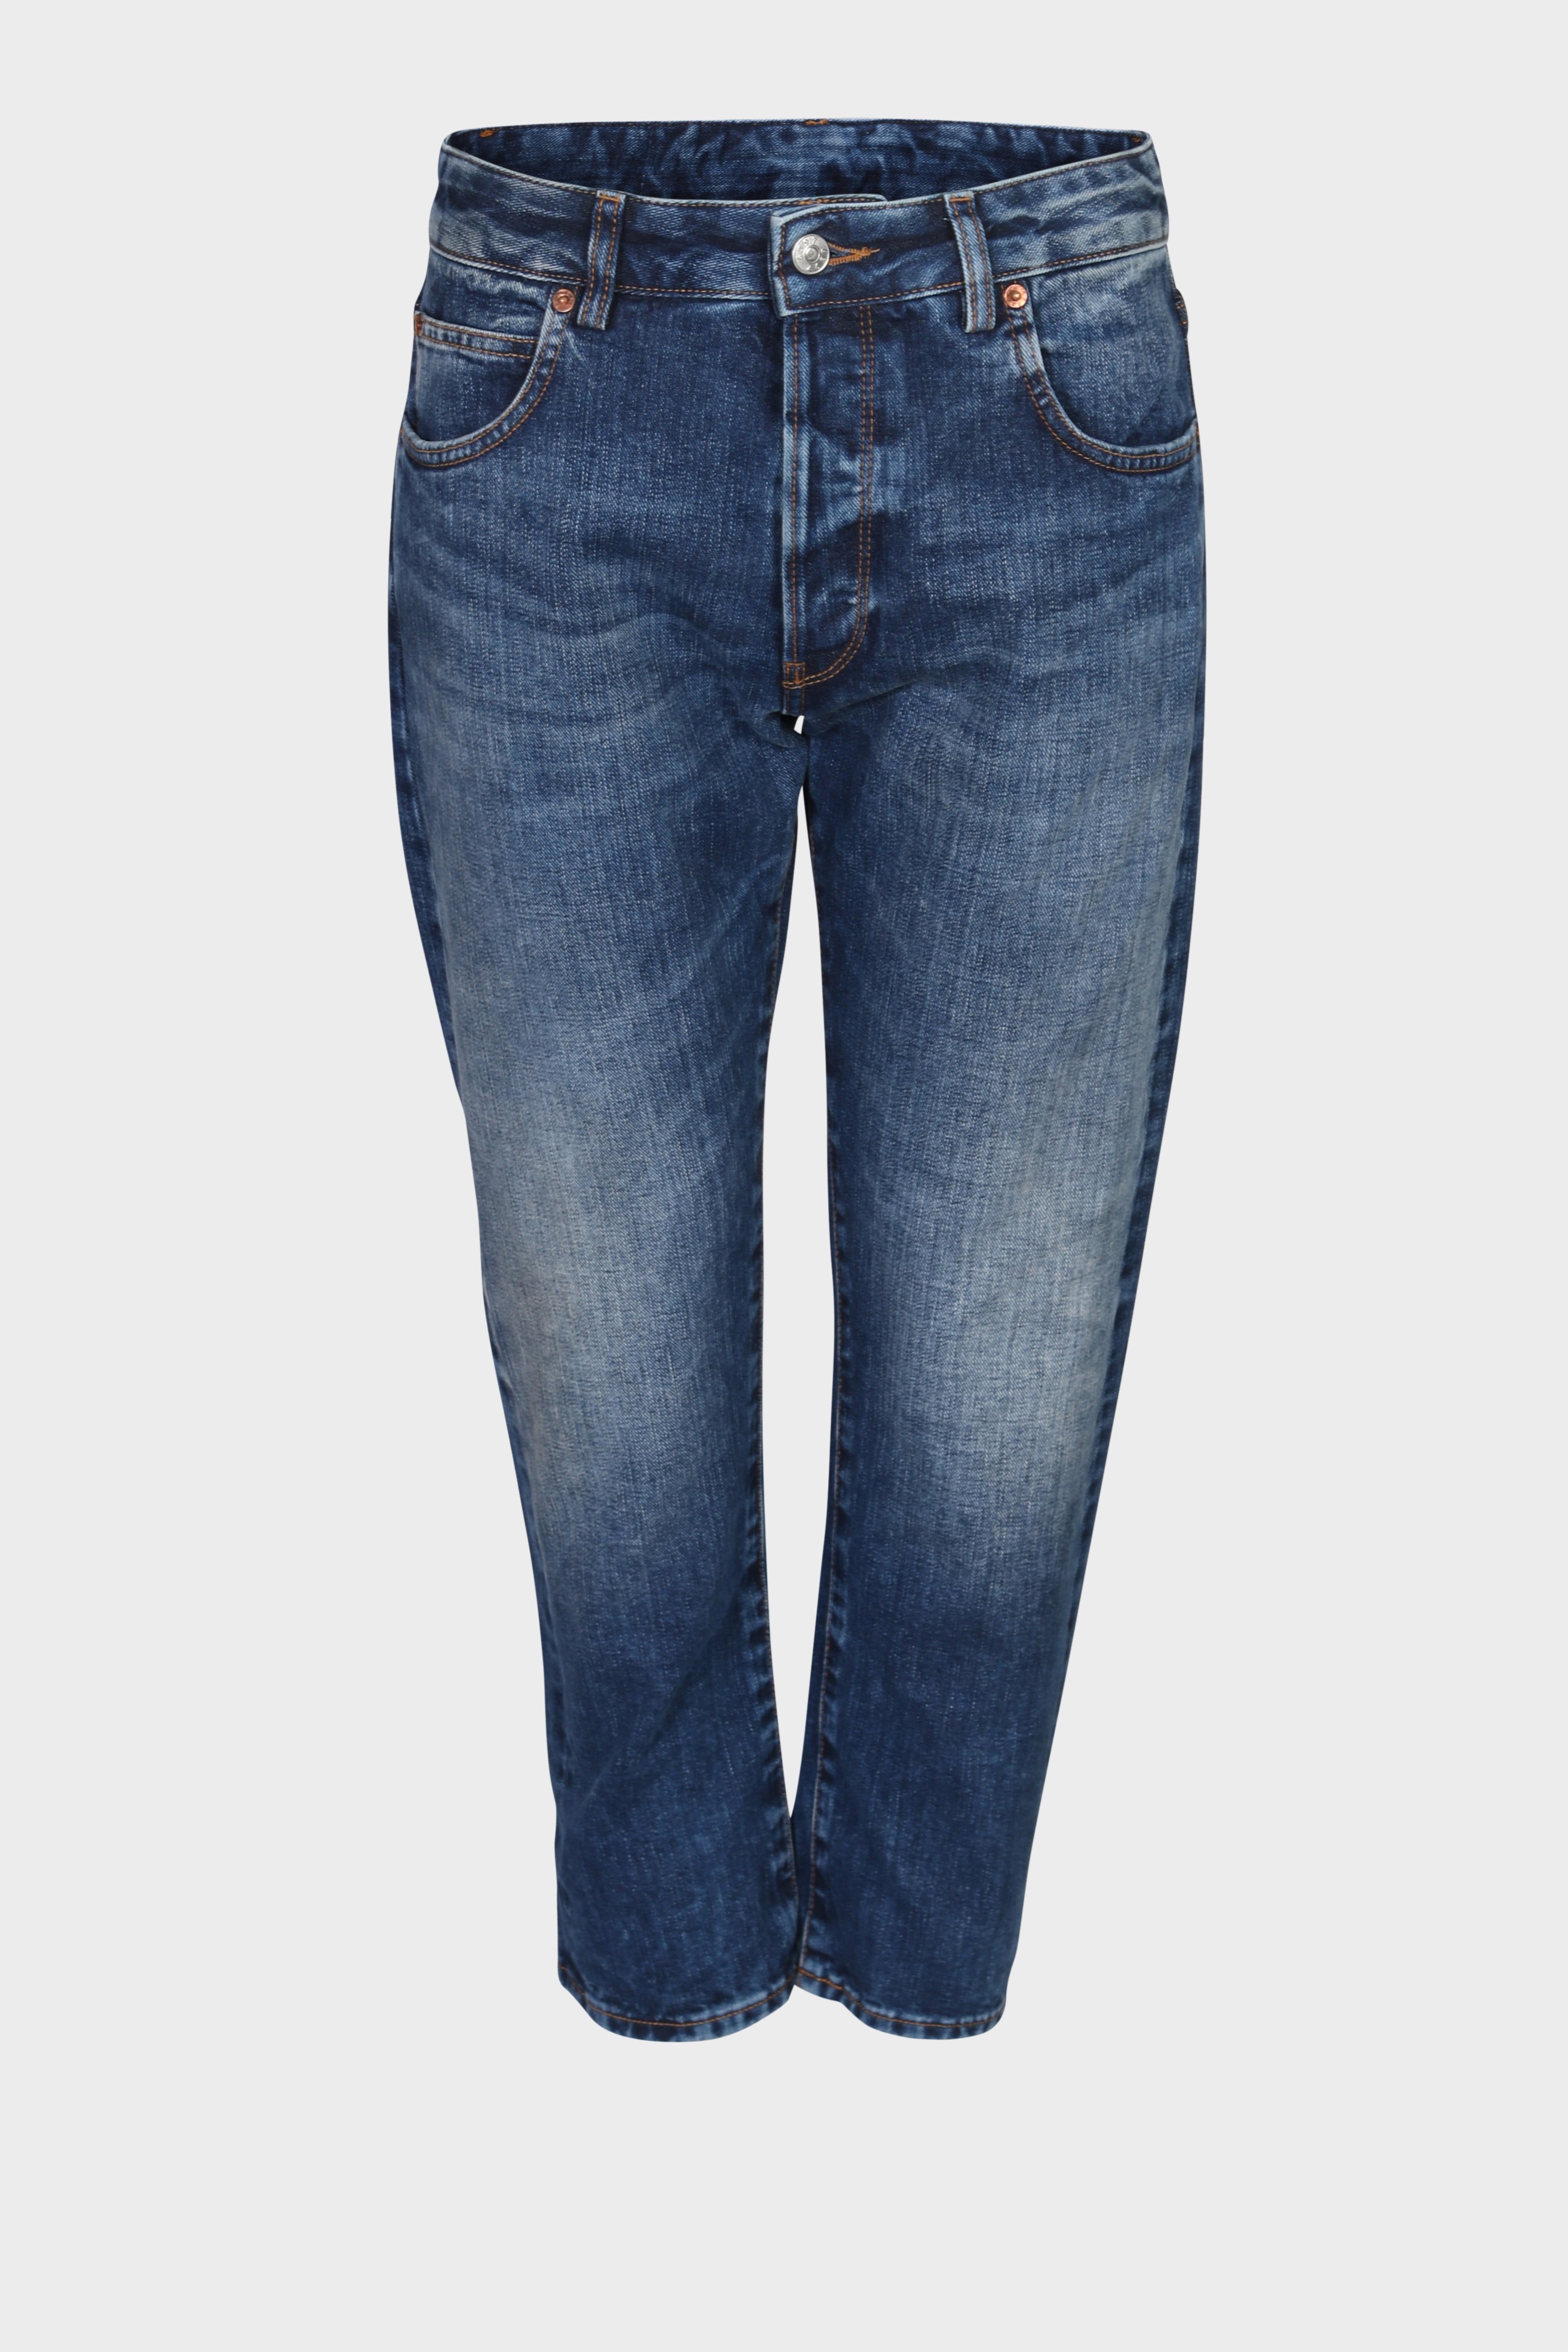 6397 Shorty Jeans in Hi-Contrast Blue 29